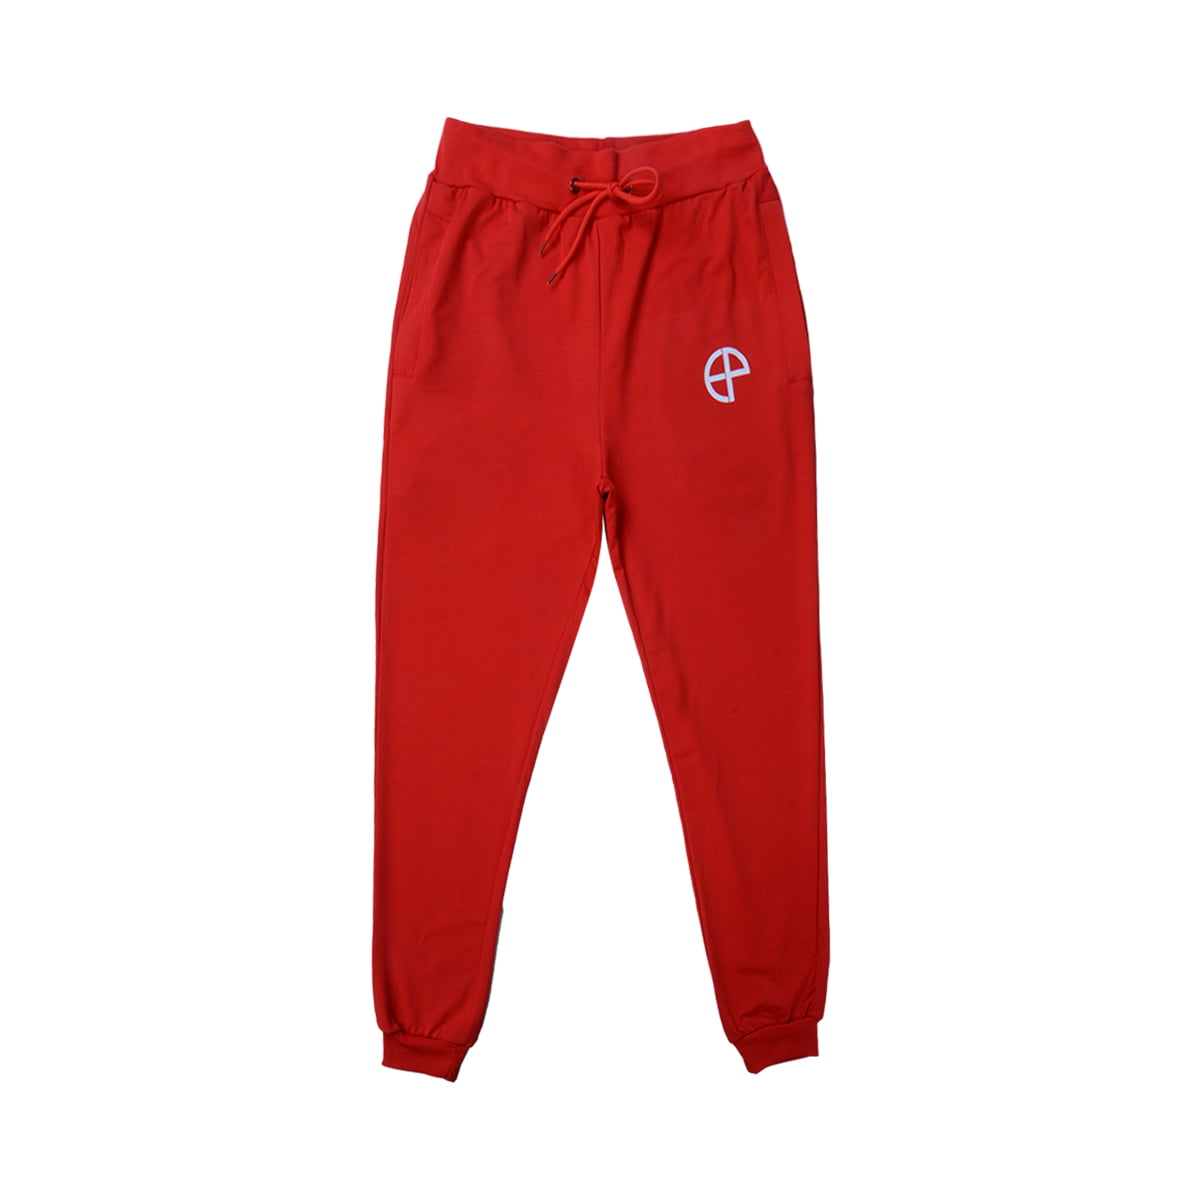 New Mens Slim Fit Tracksuit Bottoms Skinny Jogging Joggers Sweat Pants Trousers Red Xl